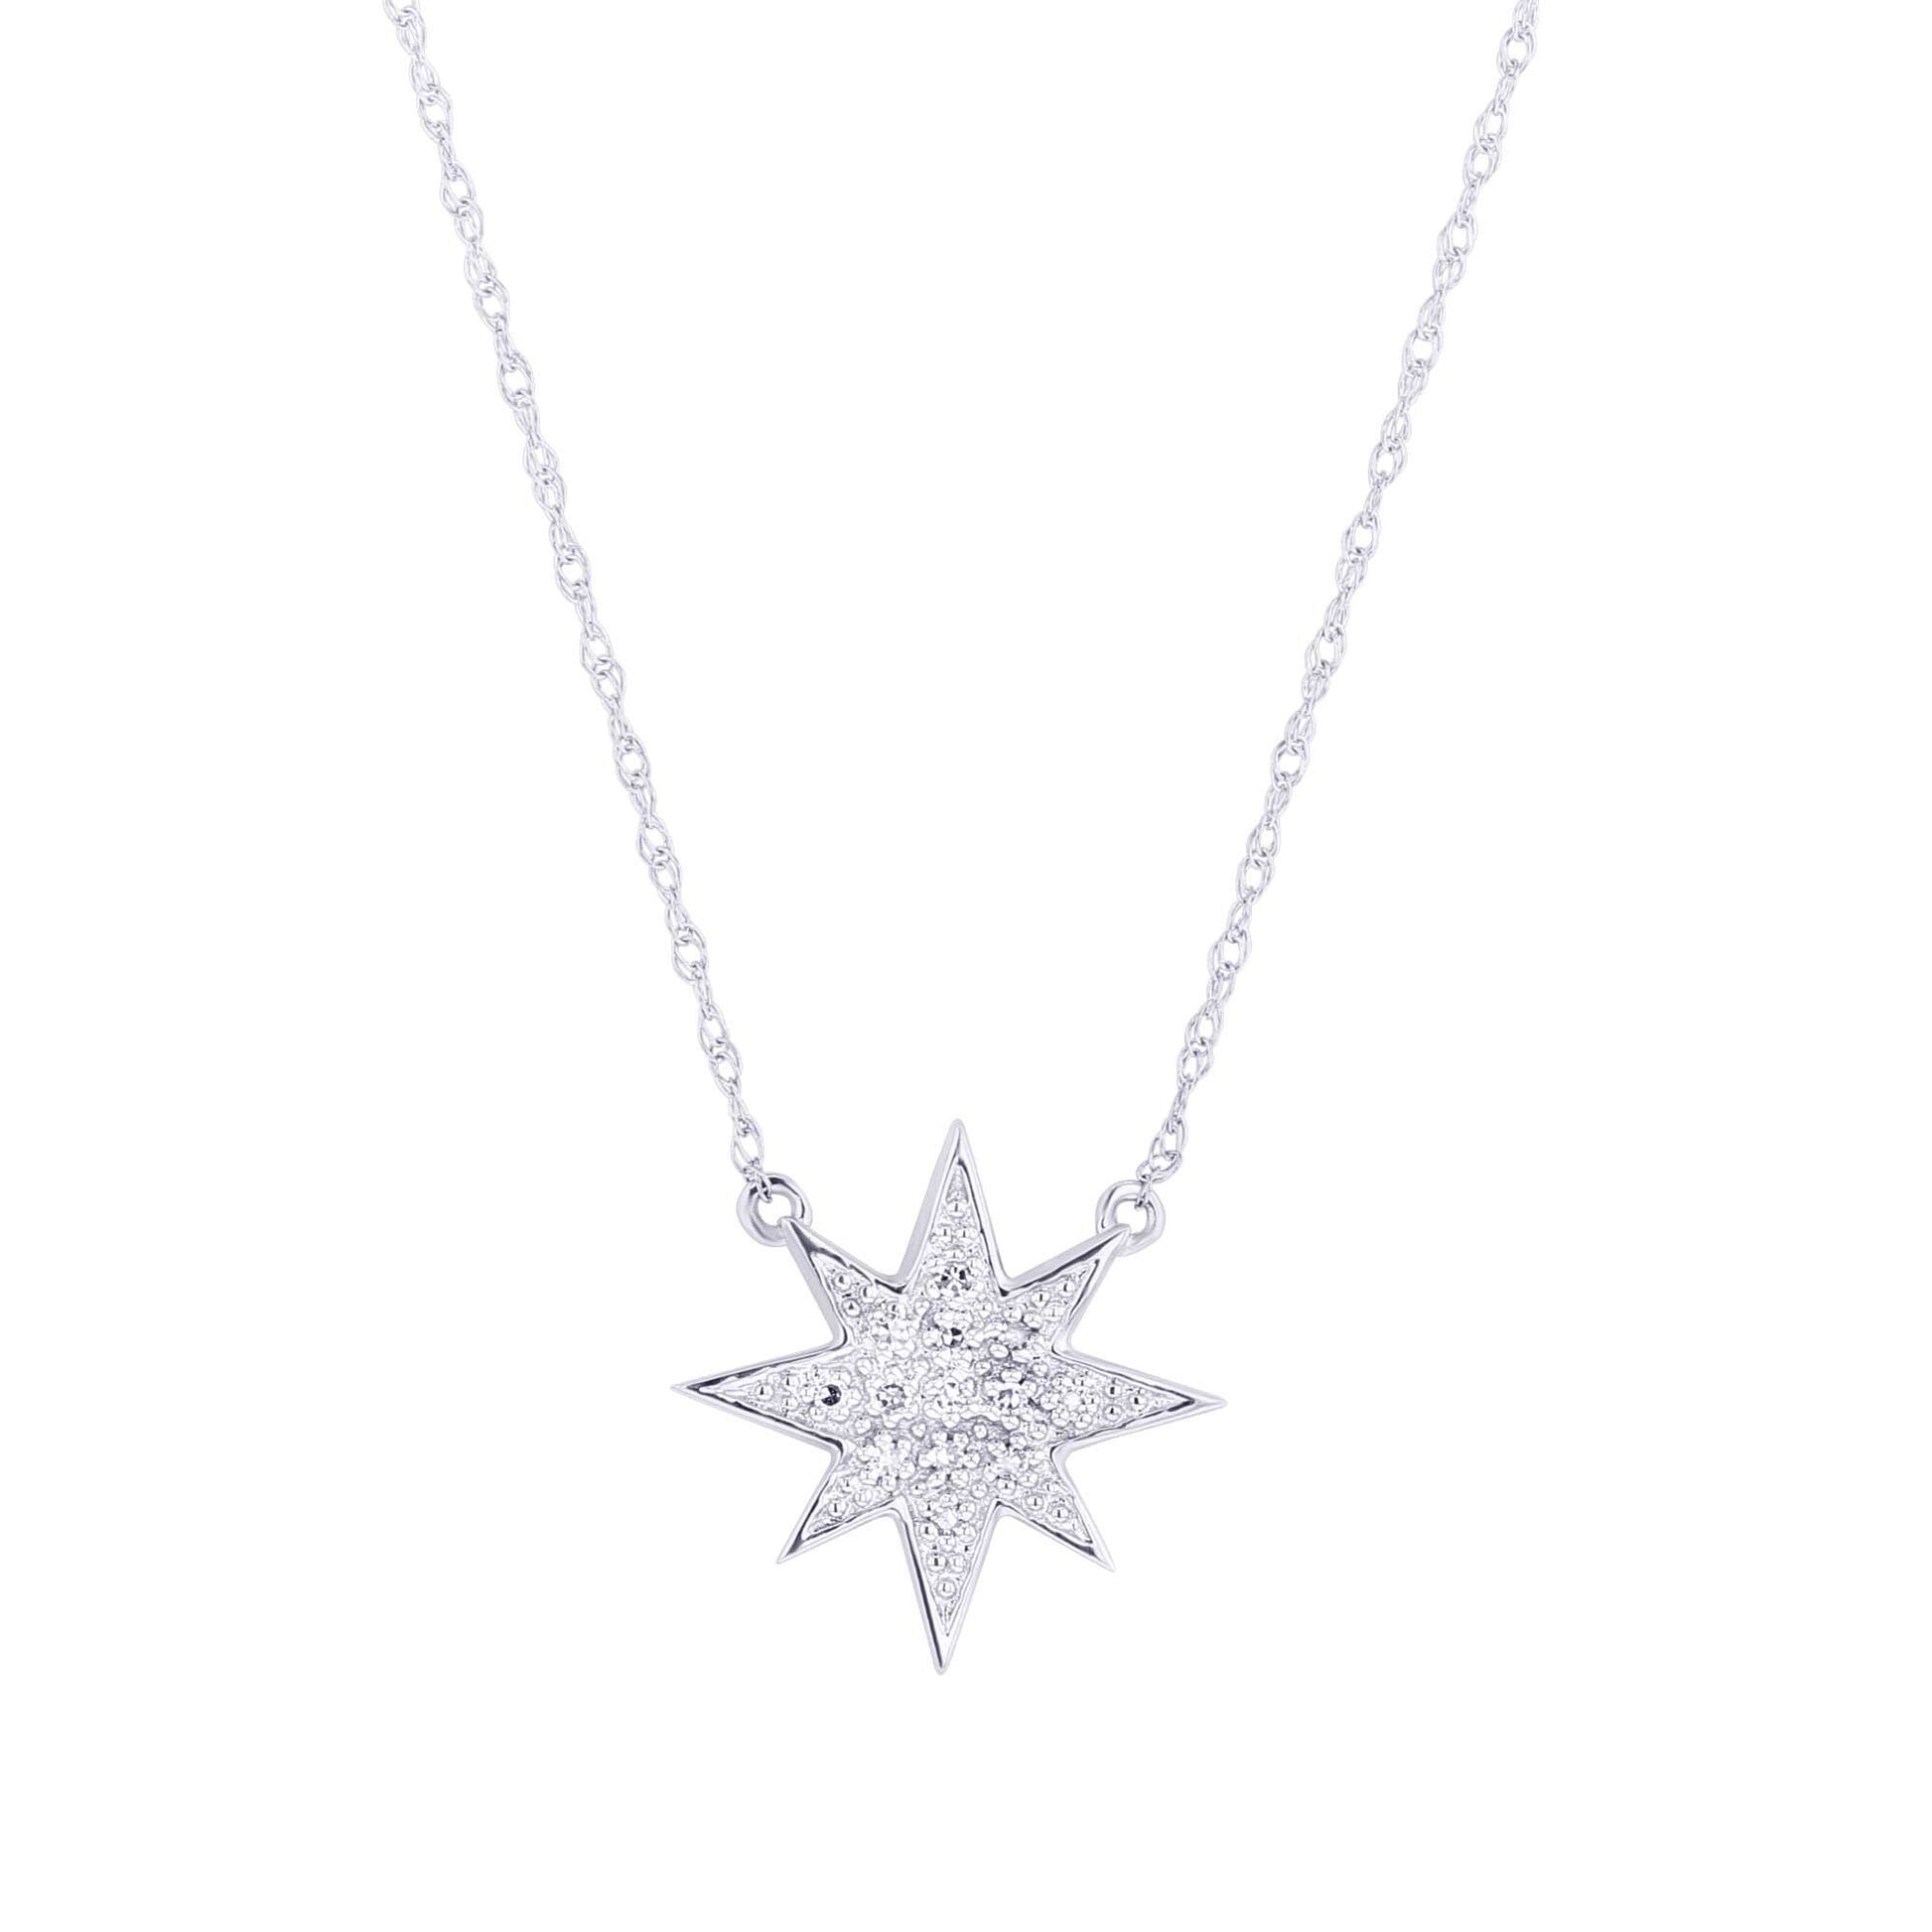 North Star Black and White Diamond Necklace